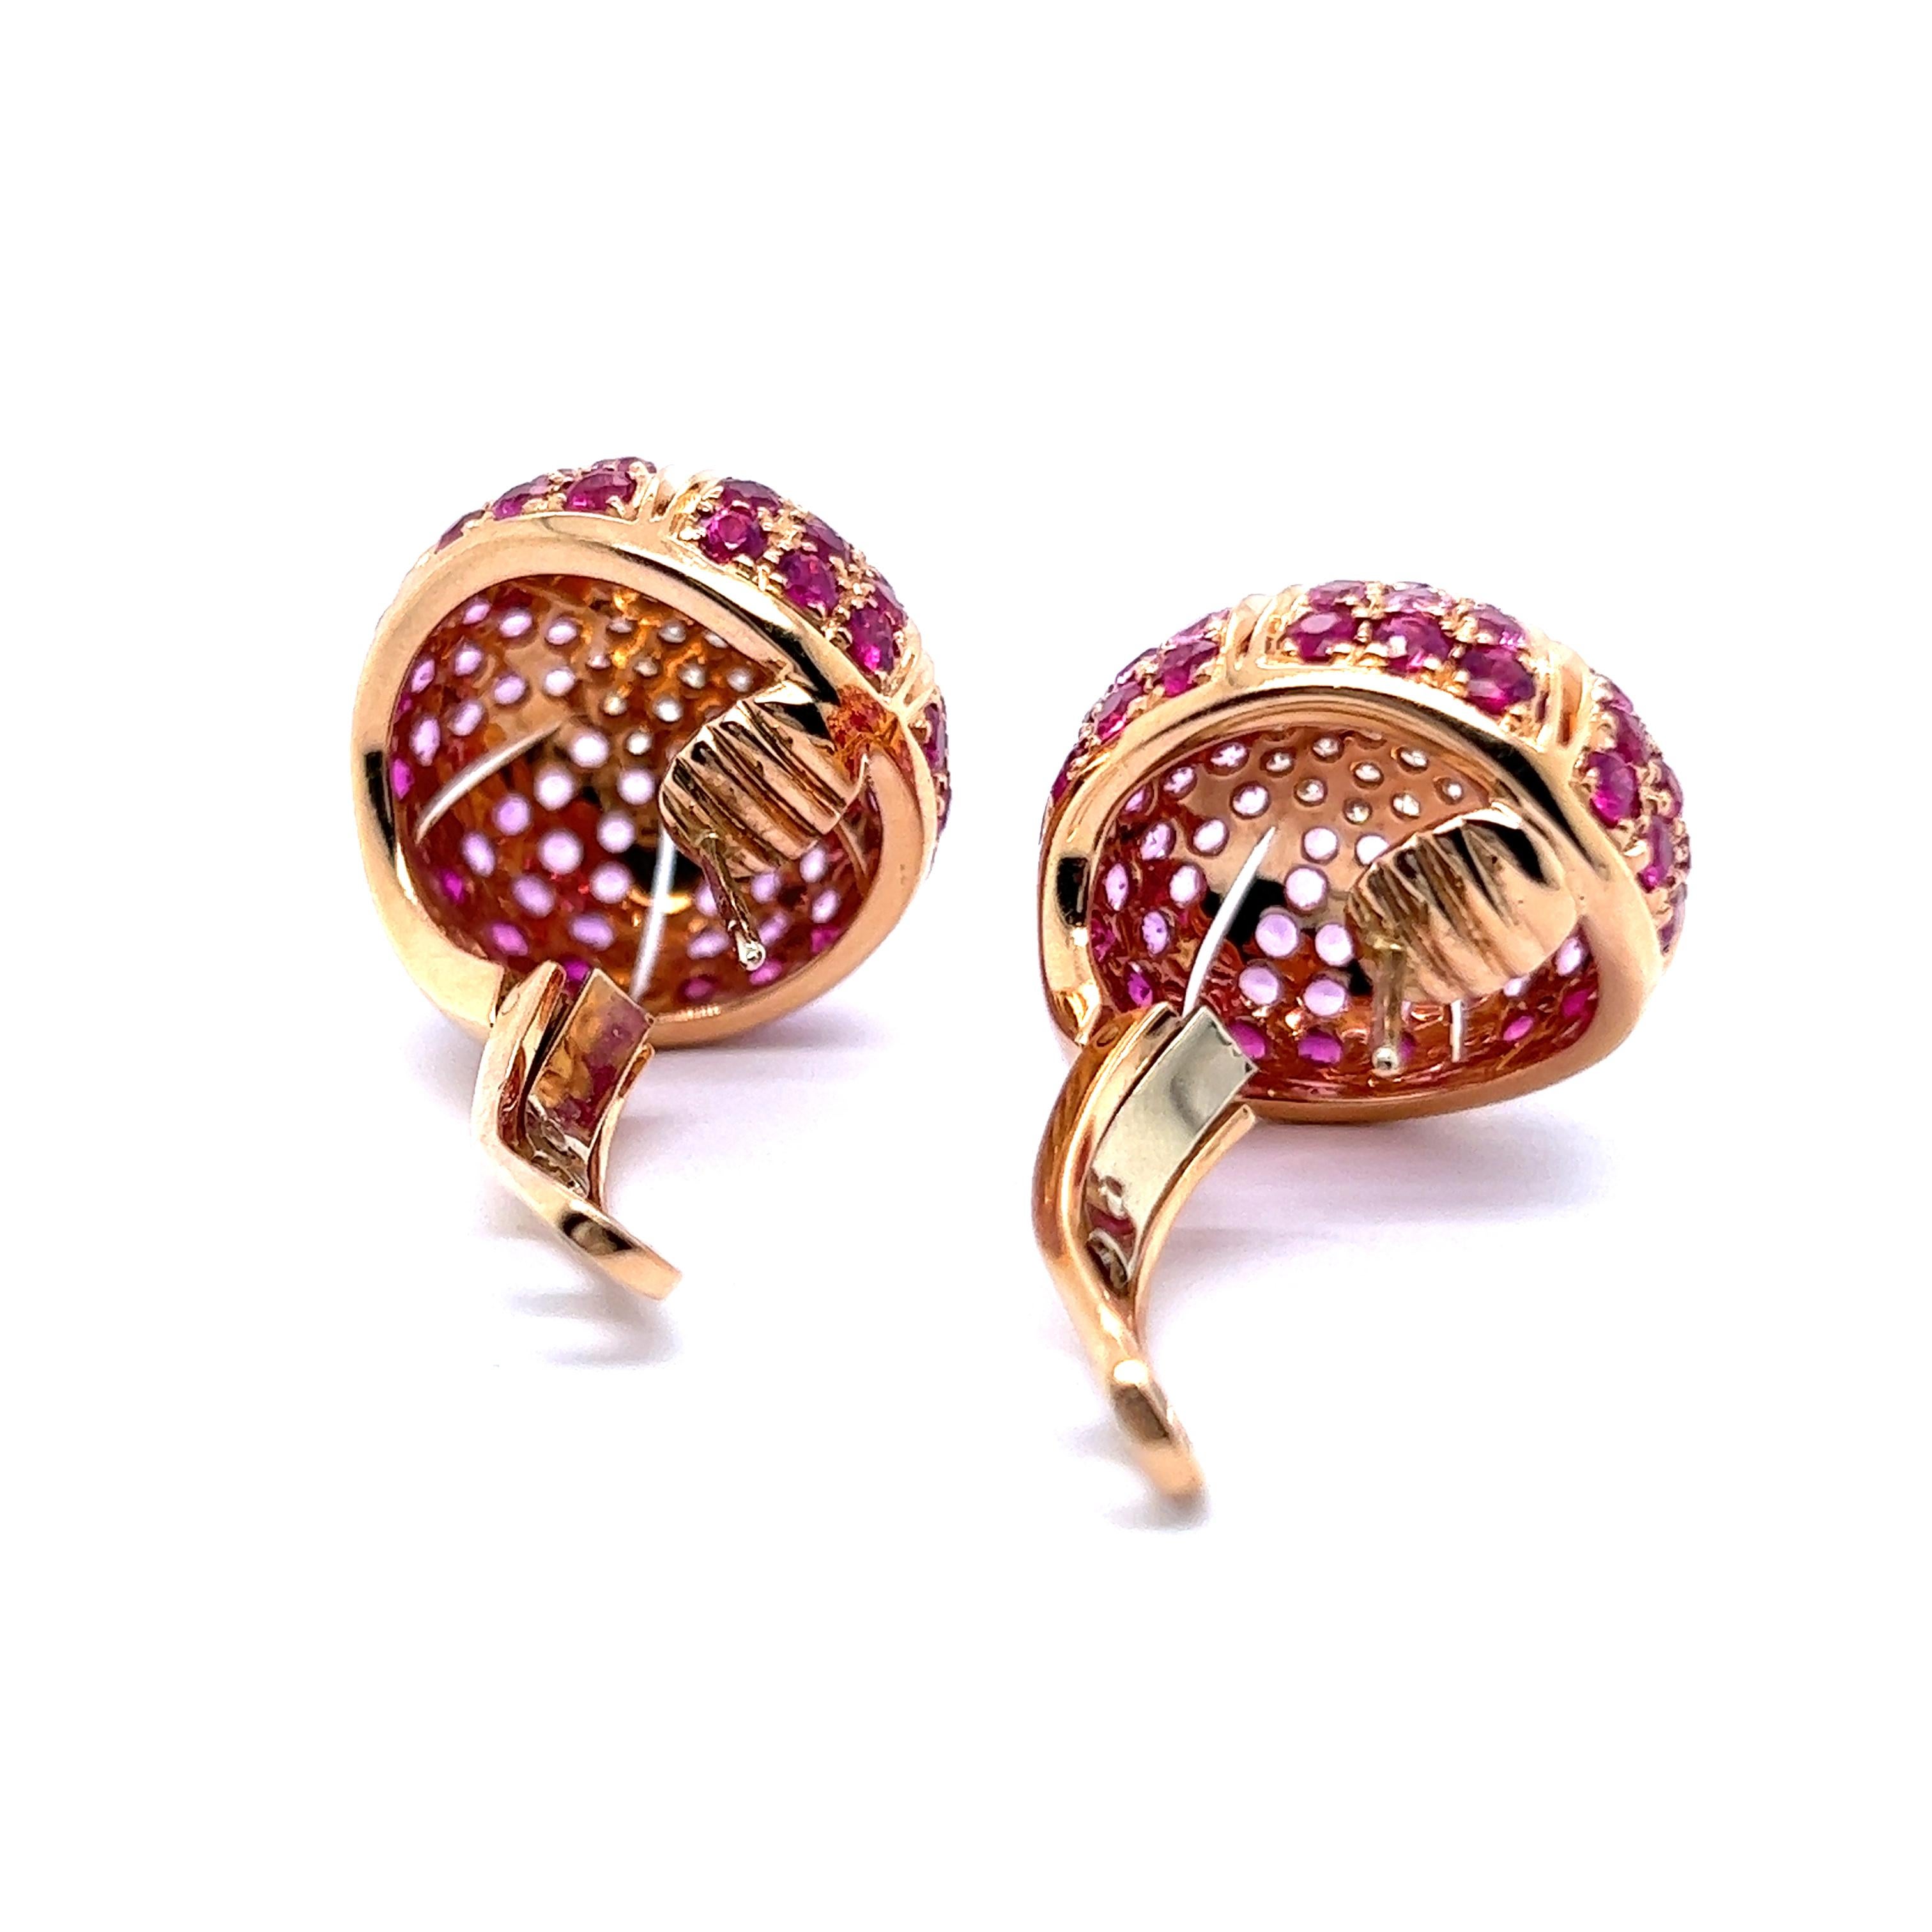 Brilliant Cut Earrings with Pink Sapphires & Diamonds in 18 Karat Rose Gold by Damiani